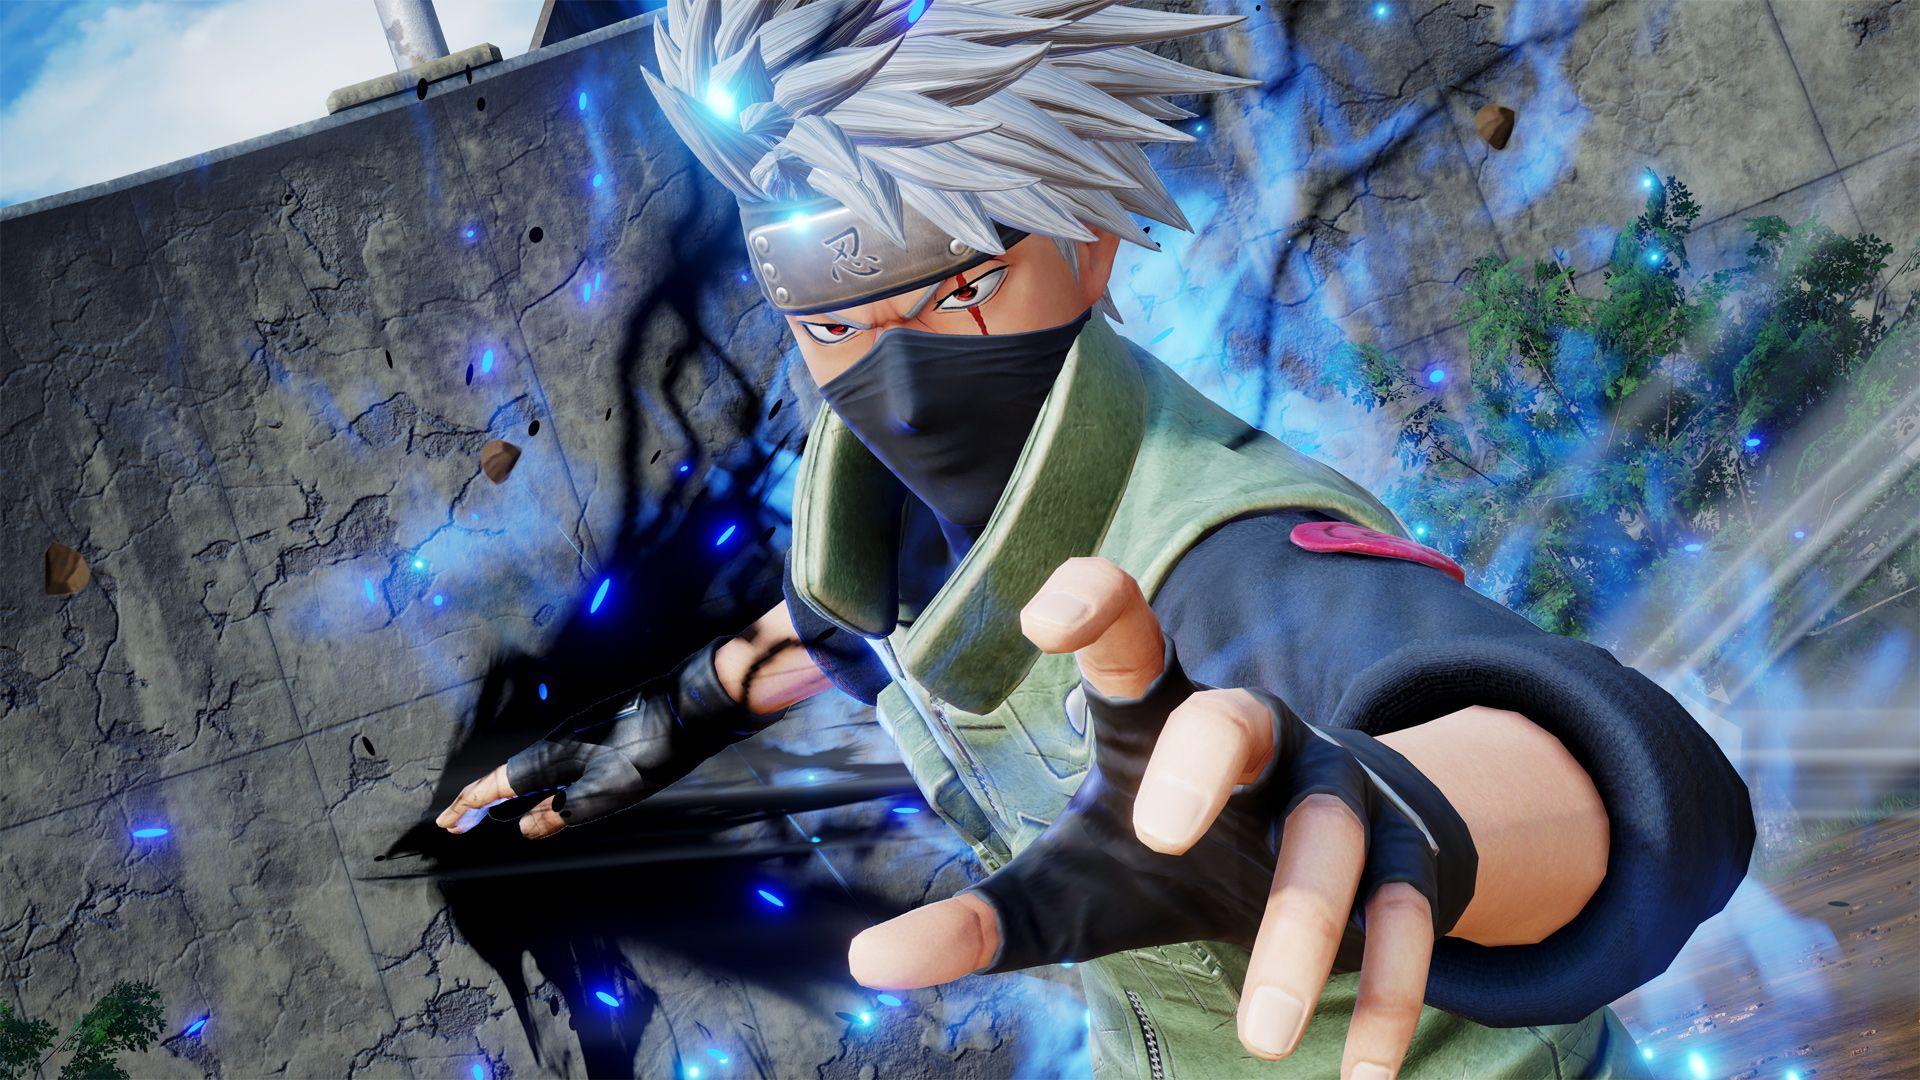 New characters from the Naruto universe coming to JUMP FORCE